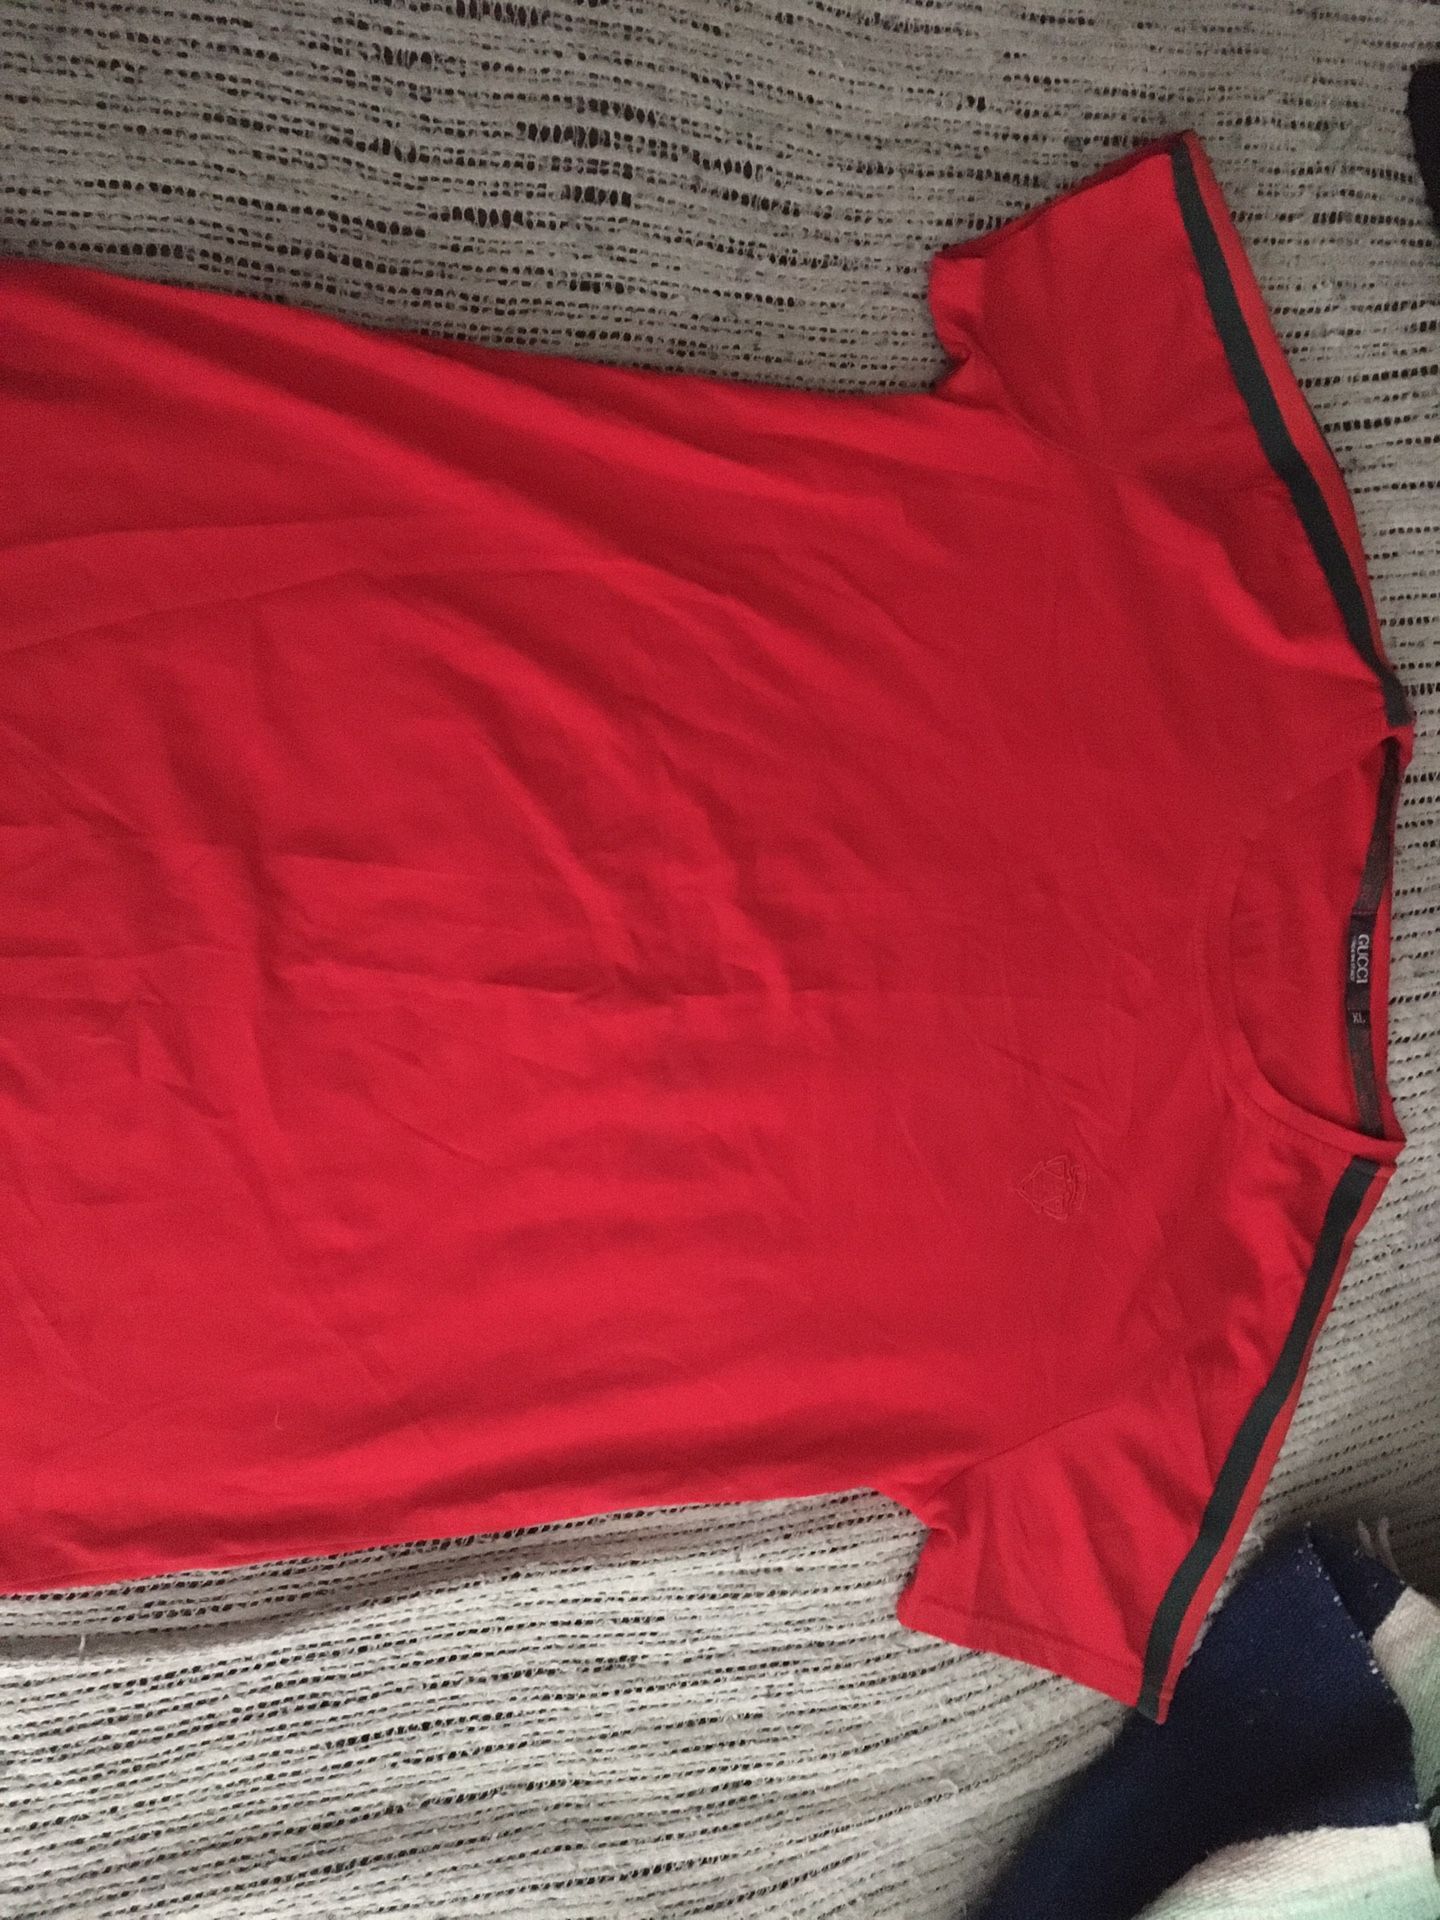 Very Nice Gucci Shirt Only $15 Firm